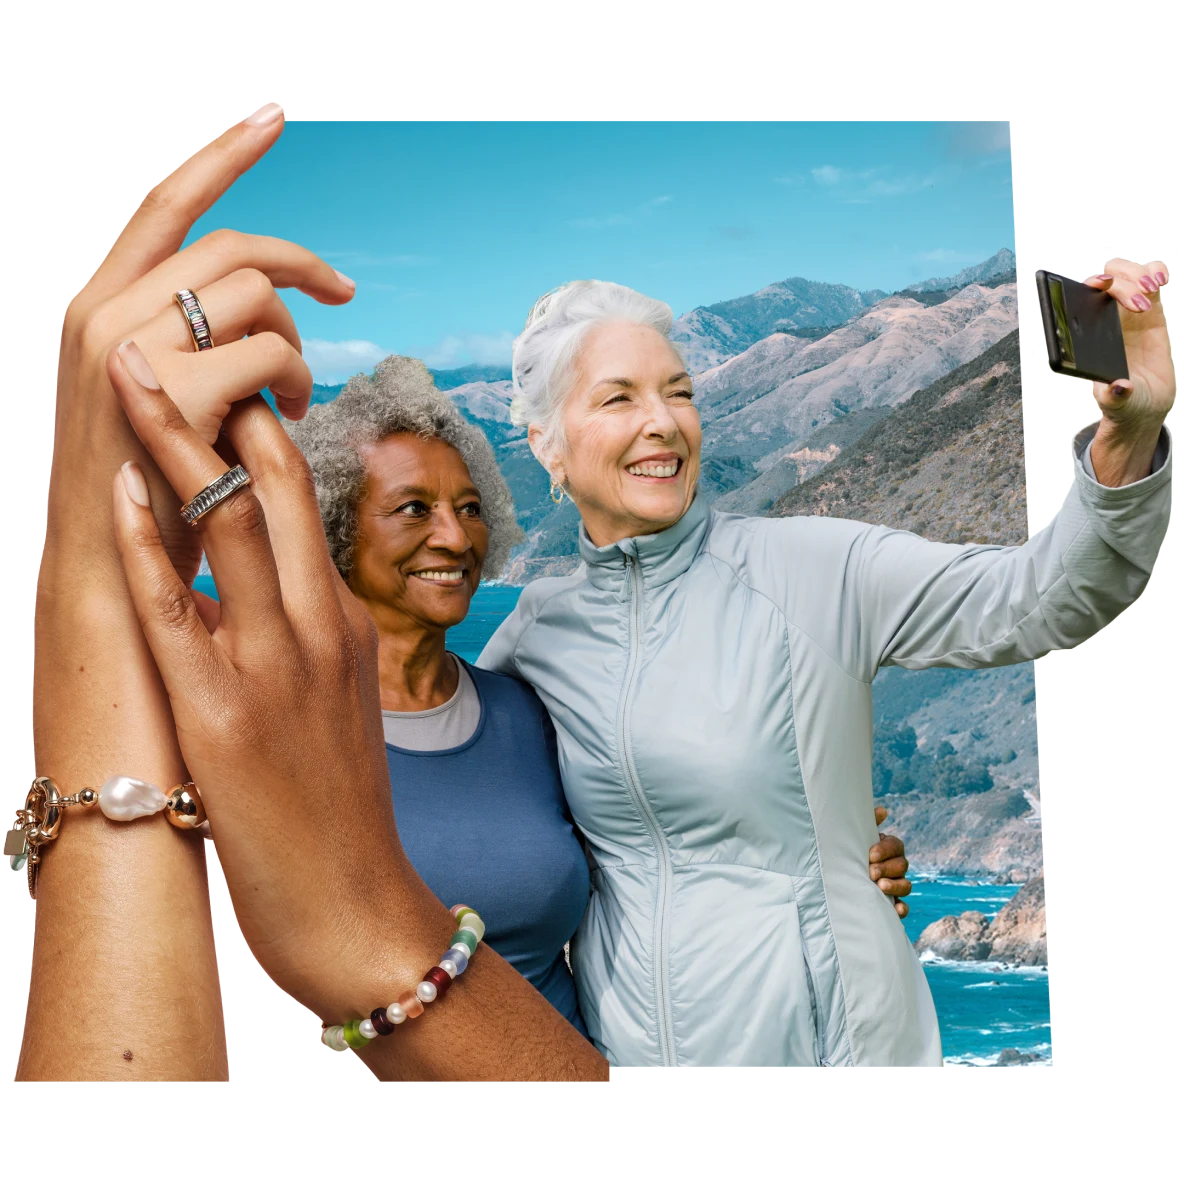 Hands with bracelets and rings slip into each other on the left. On the right, elderly Black and white women smile and take a selfie against a mountain and blue sky backdrop.